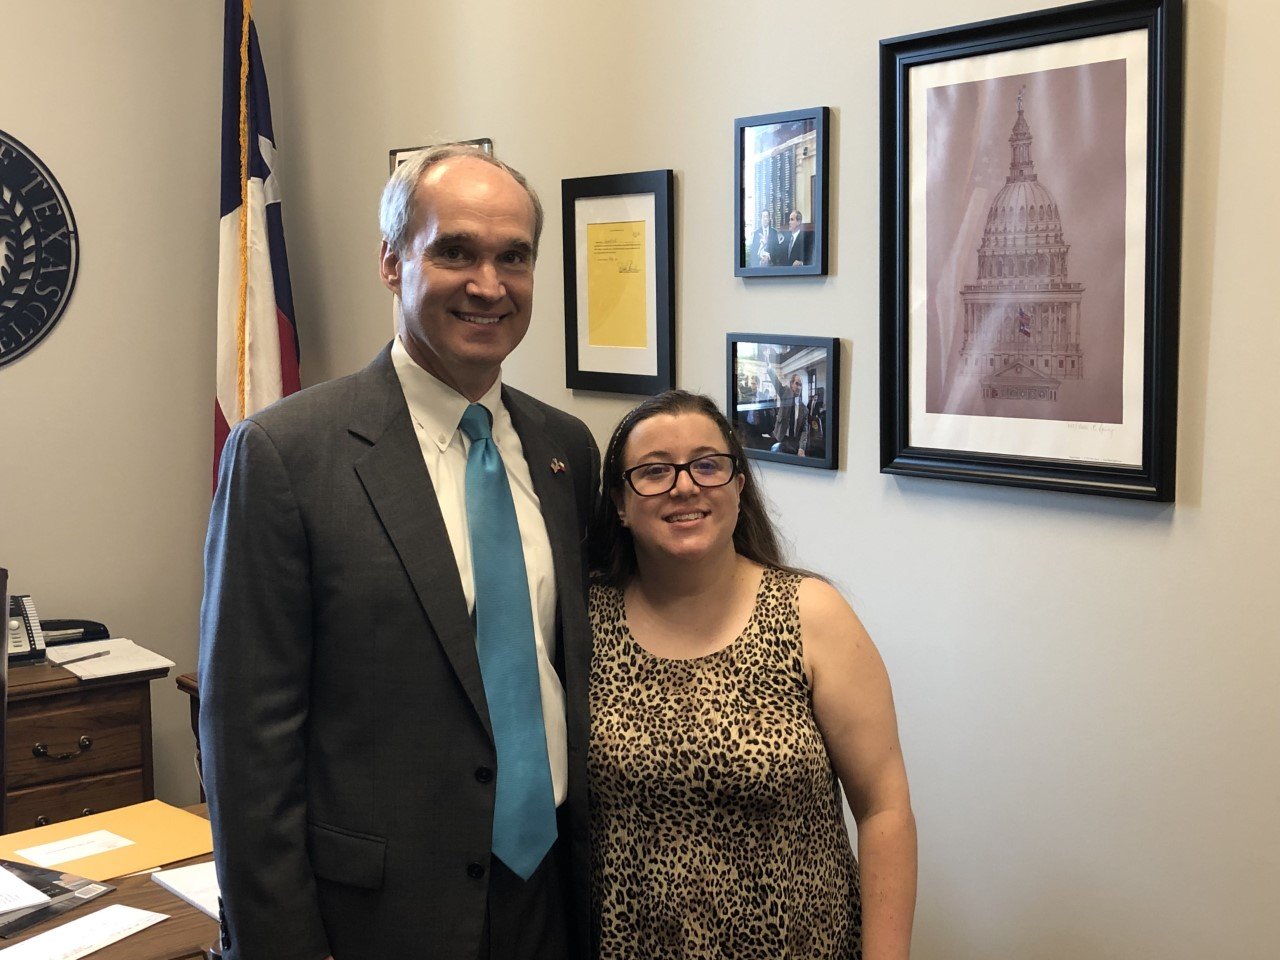 State Rep. Mike Schofield, whose district includes the Harris County portion of Katy, opened his new district office Thursday. His new office is at 22910 Colonial Parkway, which is on the ground floor of the new Houston Community College building. Here he poses with Shelby Day, a Special Olympics athlete and advocate, in his new office.